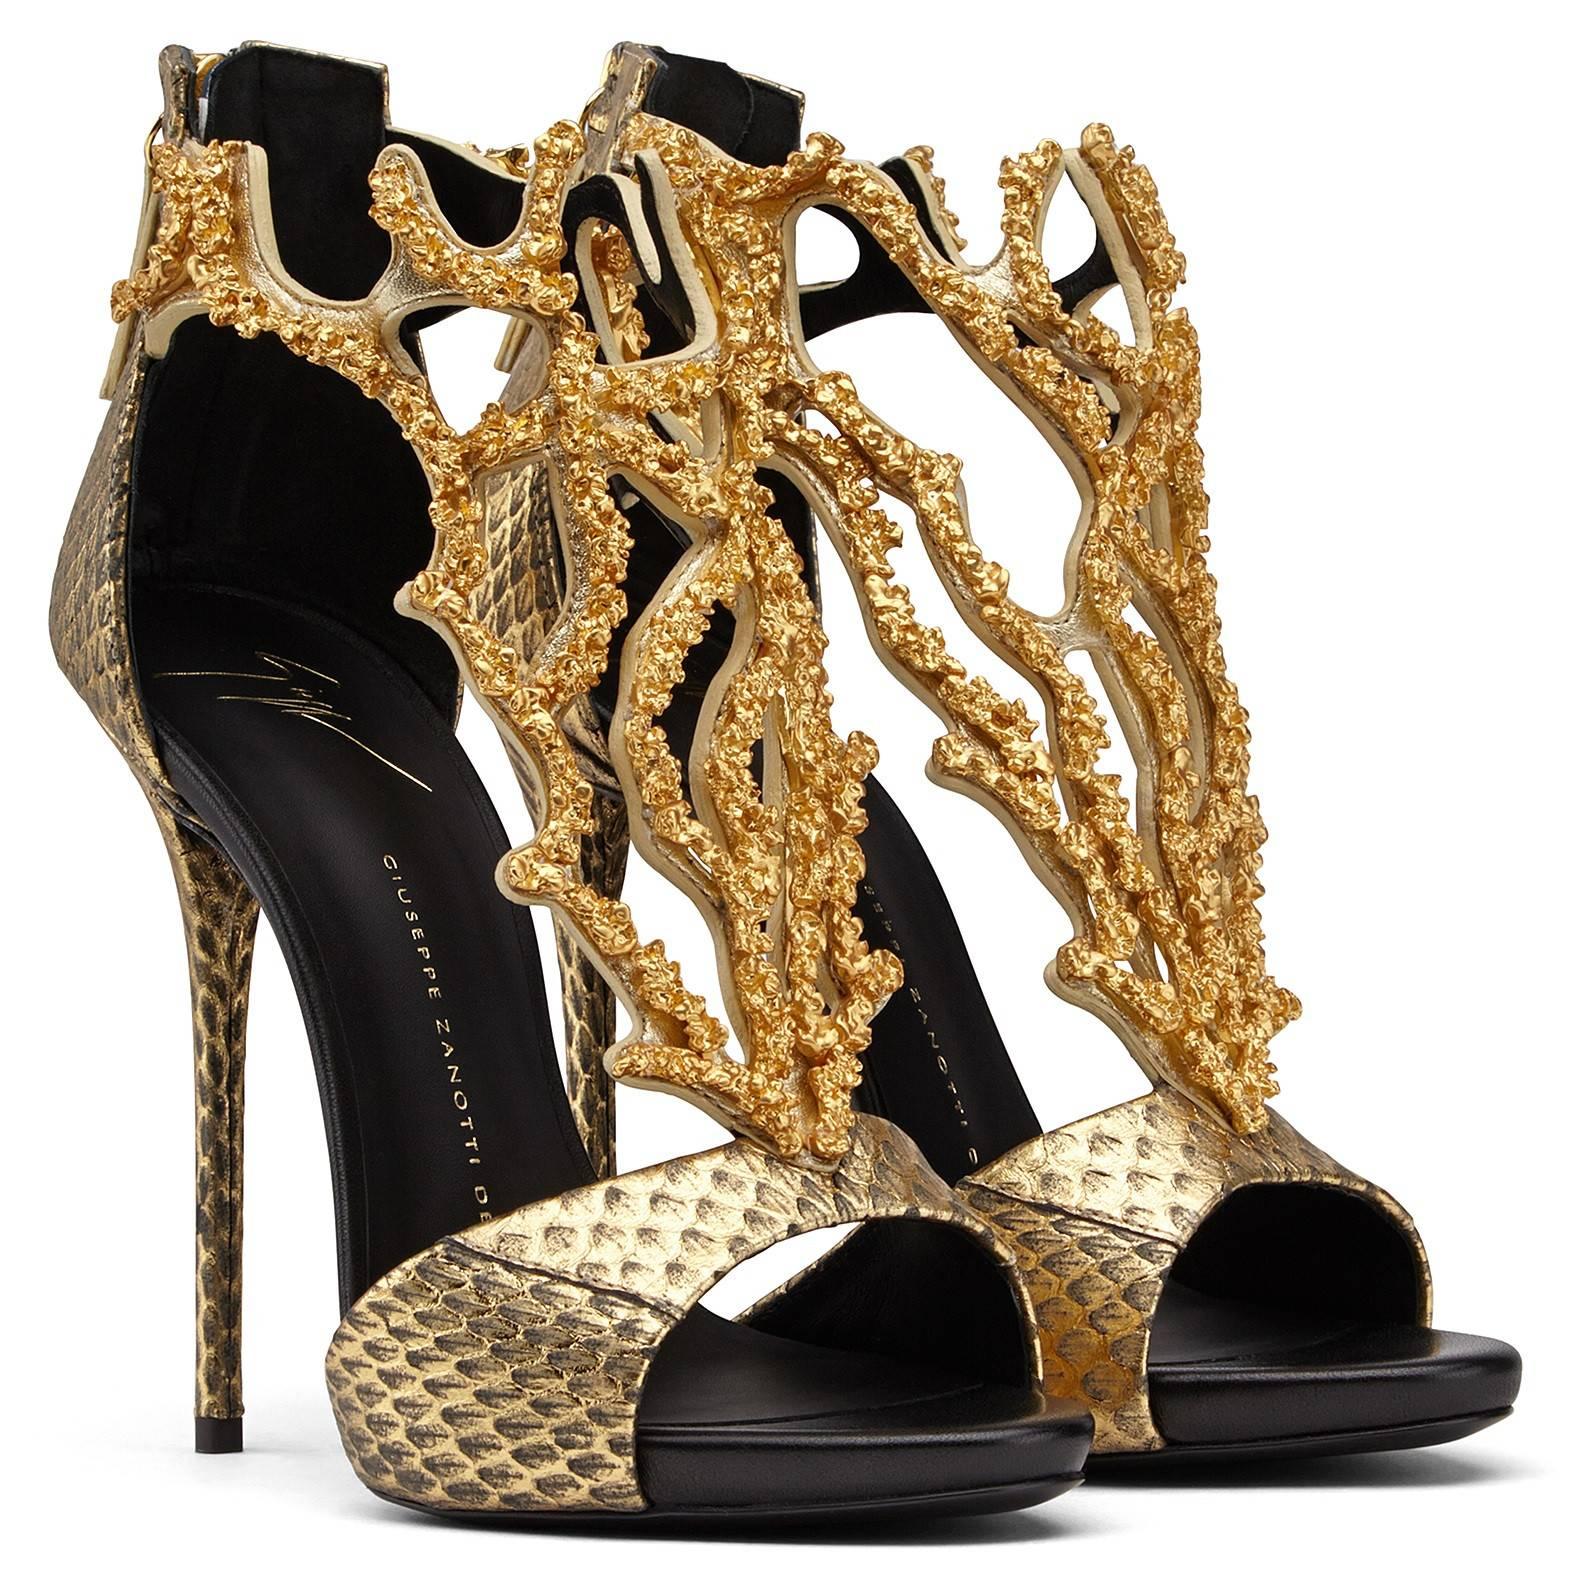 Giuseppe Zanotti New Leather Gold Coral Crystal Evening Sandals Heels in Box

Size IT 36 - Our only pair!
Python embossed leather
Crystal
Made in Italy
Zipper closure
Heel height 4.75